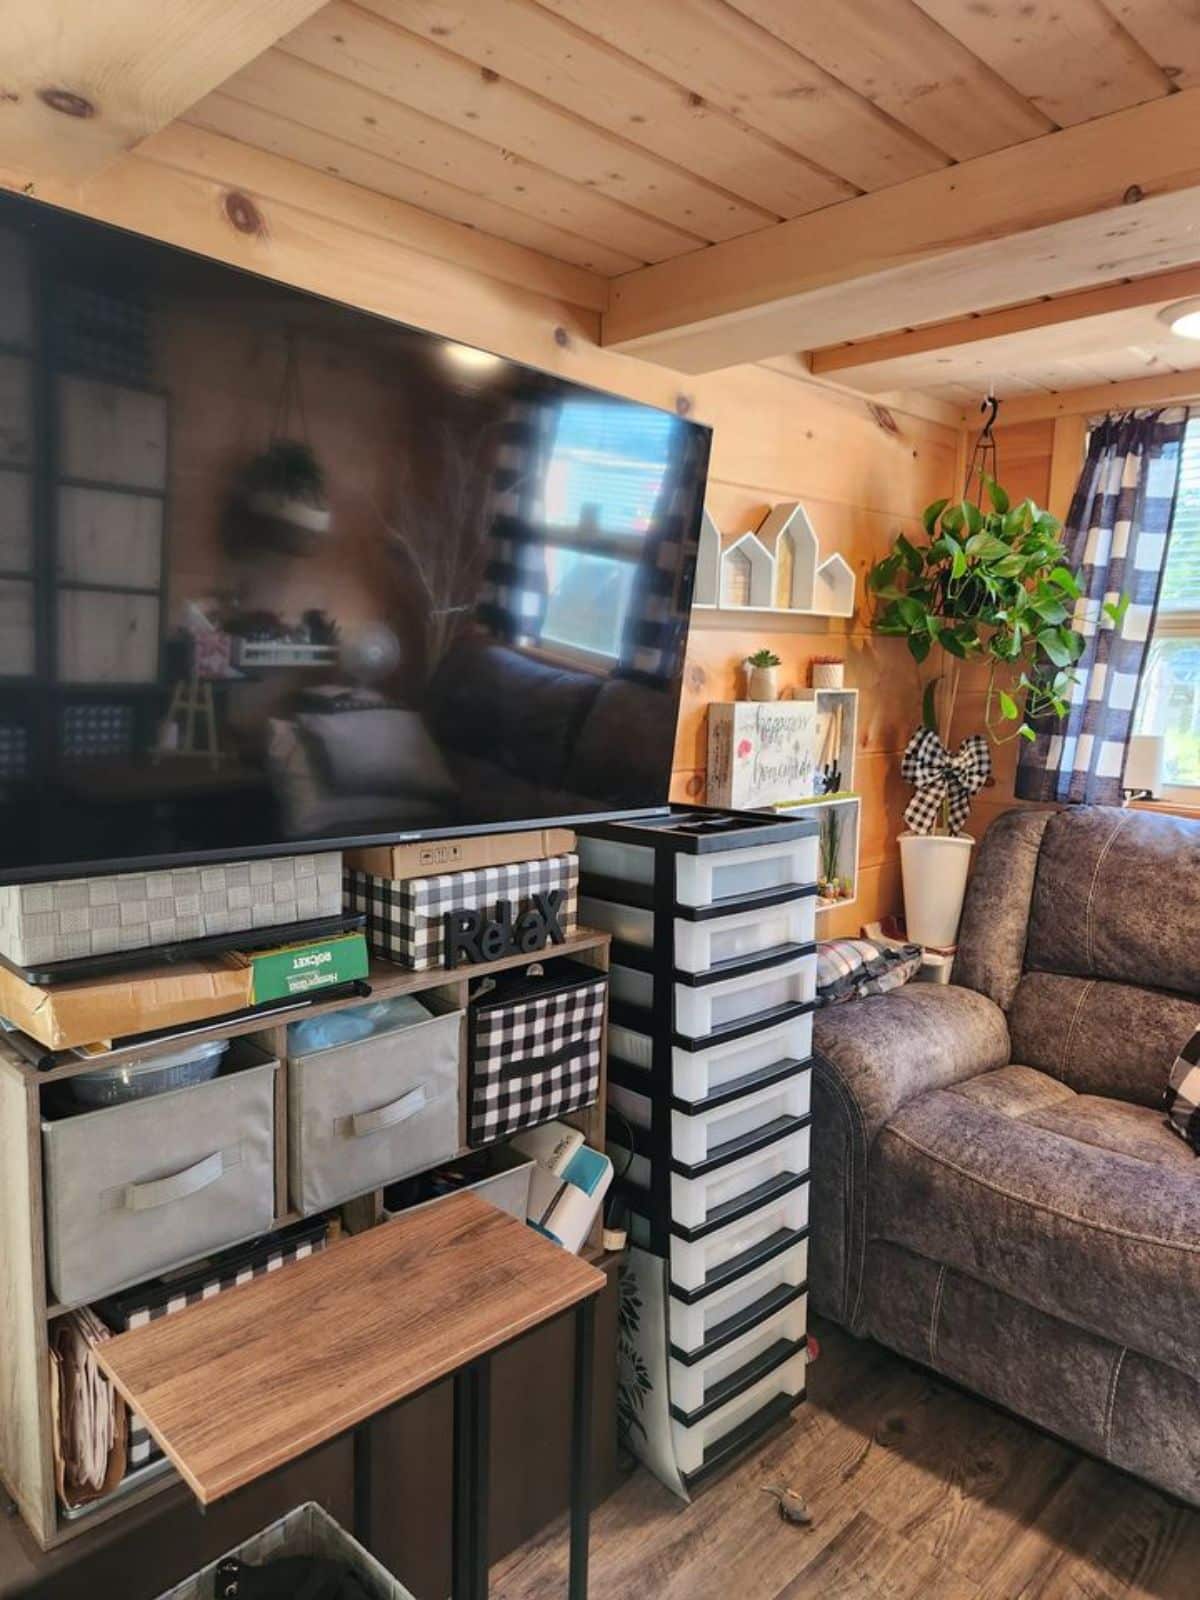 entertainment unit in the living area with wall mounted TV set